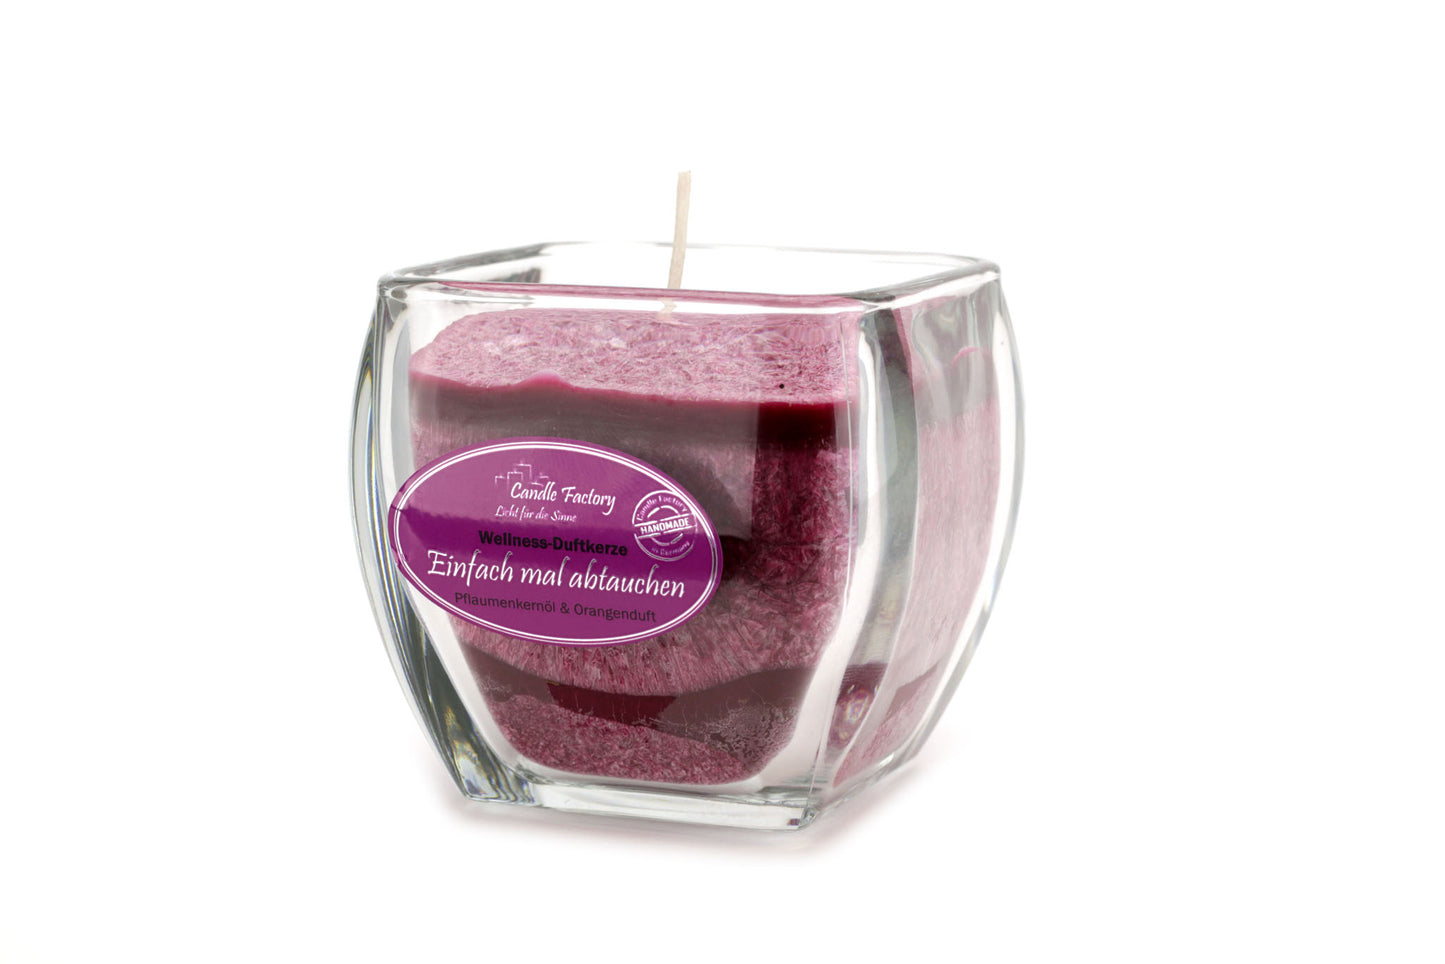 <transcy>Candle Factory wellness scented candle Just take a dip</transcy>